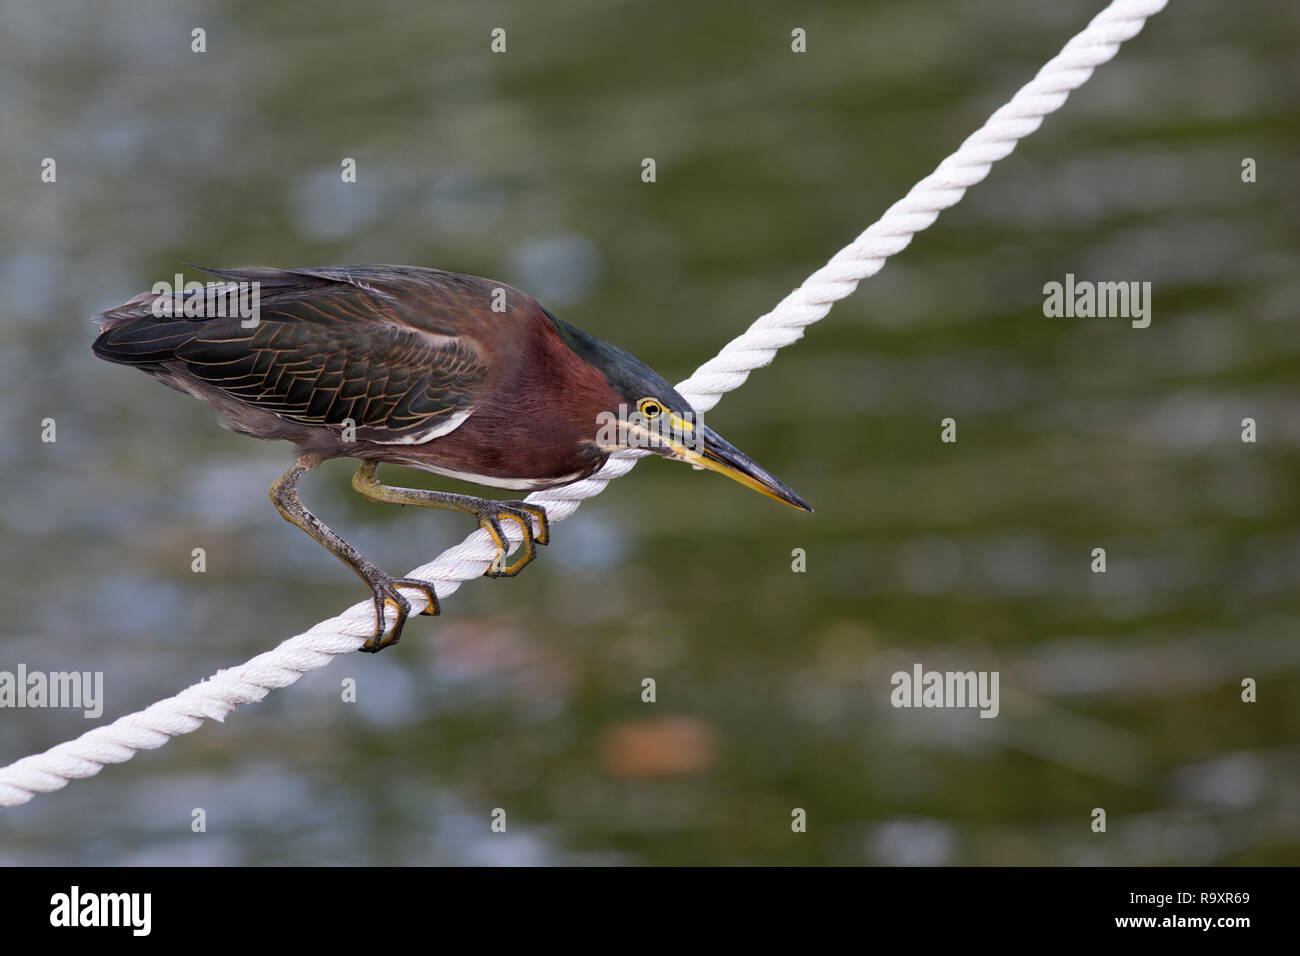 Green Heron (Butorides virescens) on the ropes of a boat line at a dock in South Florida concentrating on fish in the water below Stock Photo